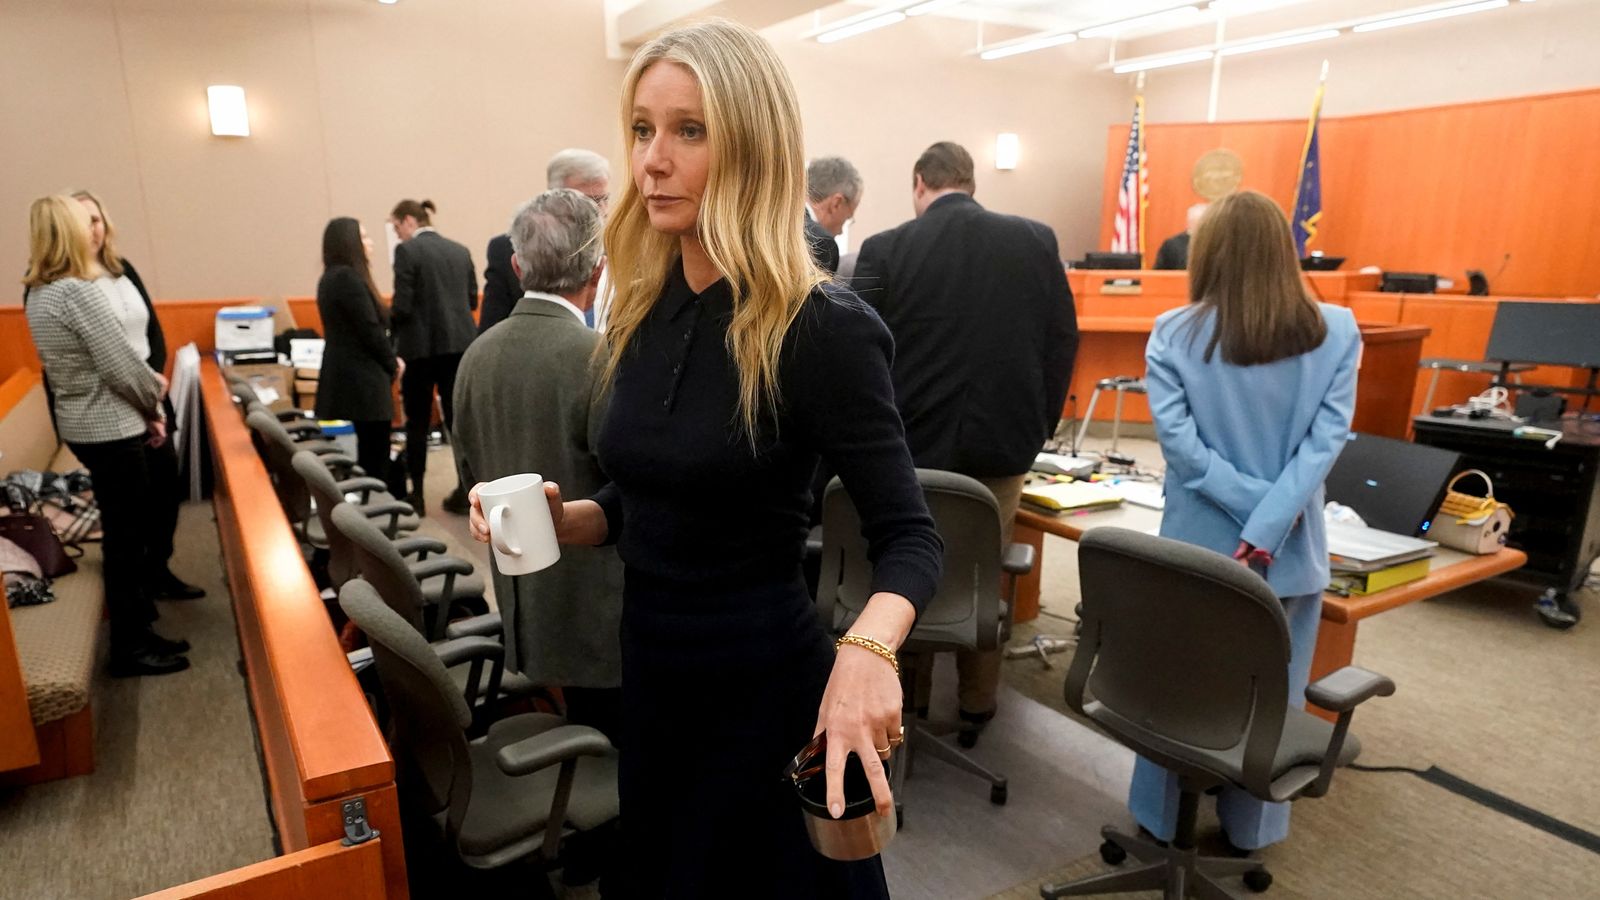 Gwyneth Paltrow's ski collision lawsuit testimony: Five notable moments